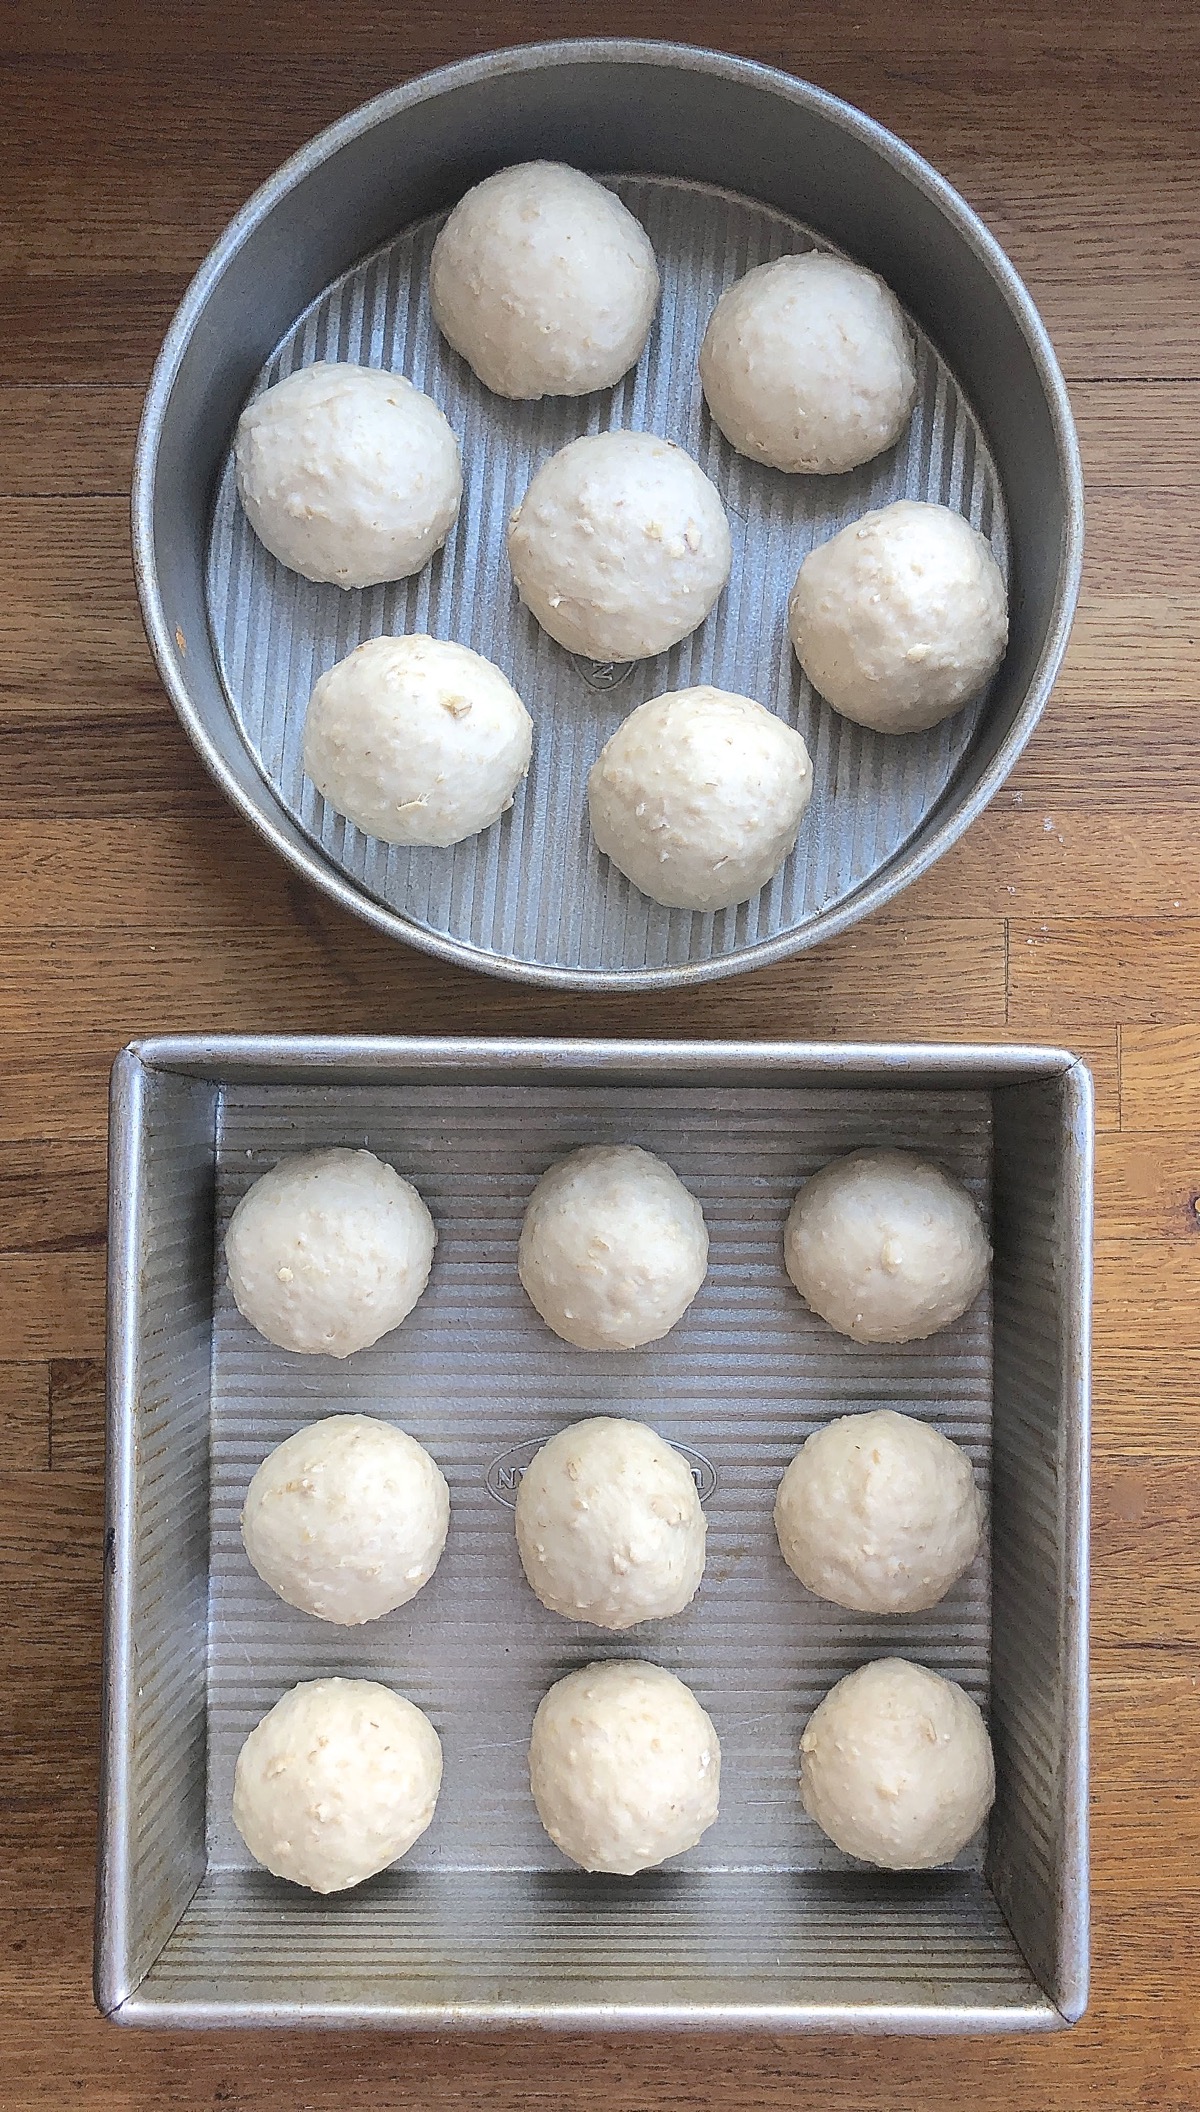 Oatmeal bread dough shaped into rolls and spaced in pans, ready to rise